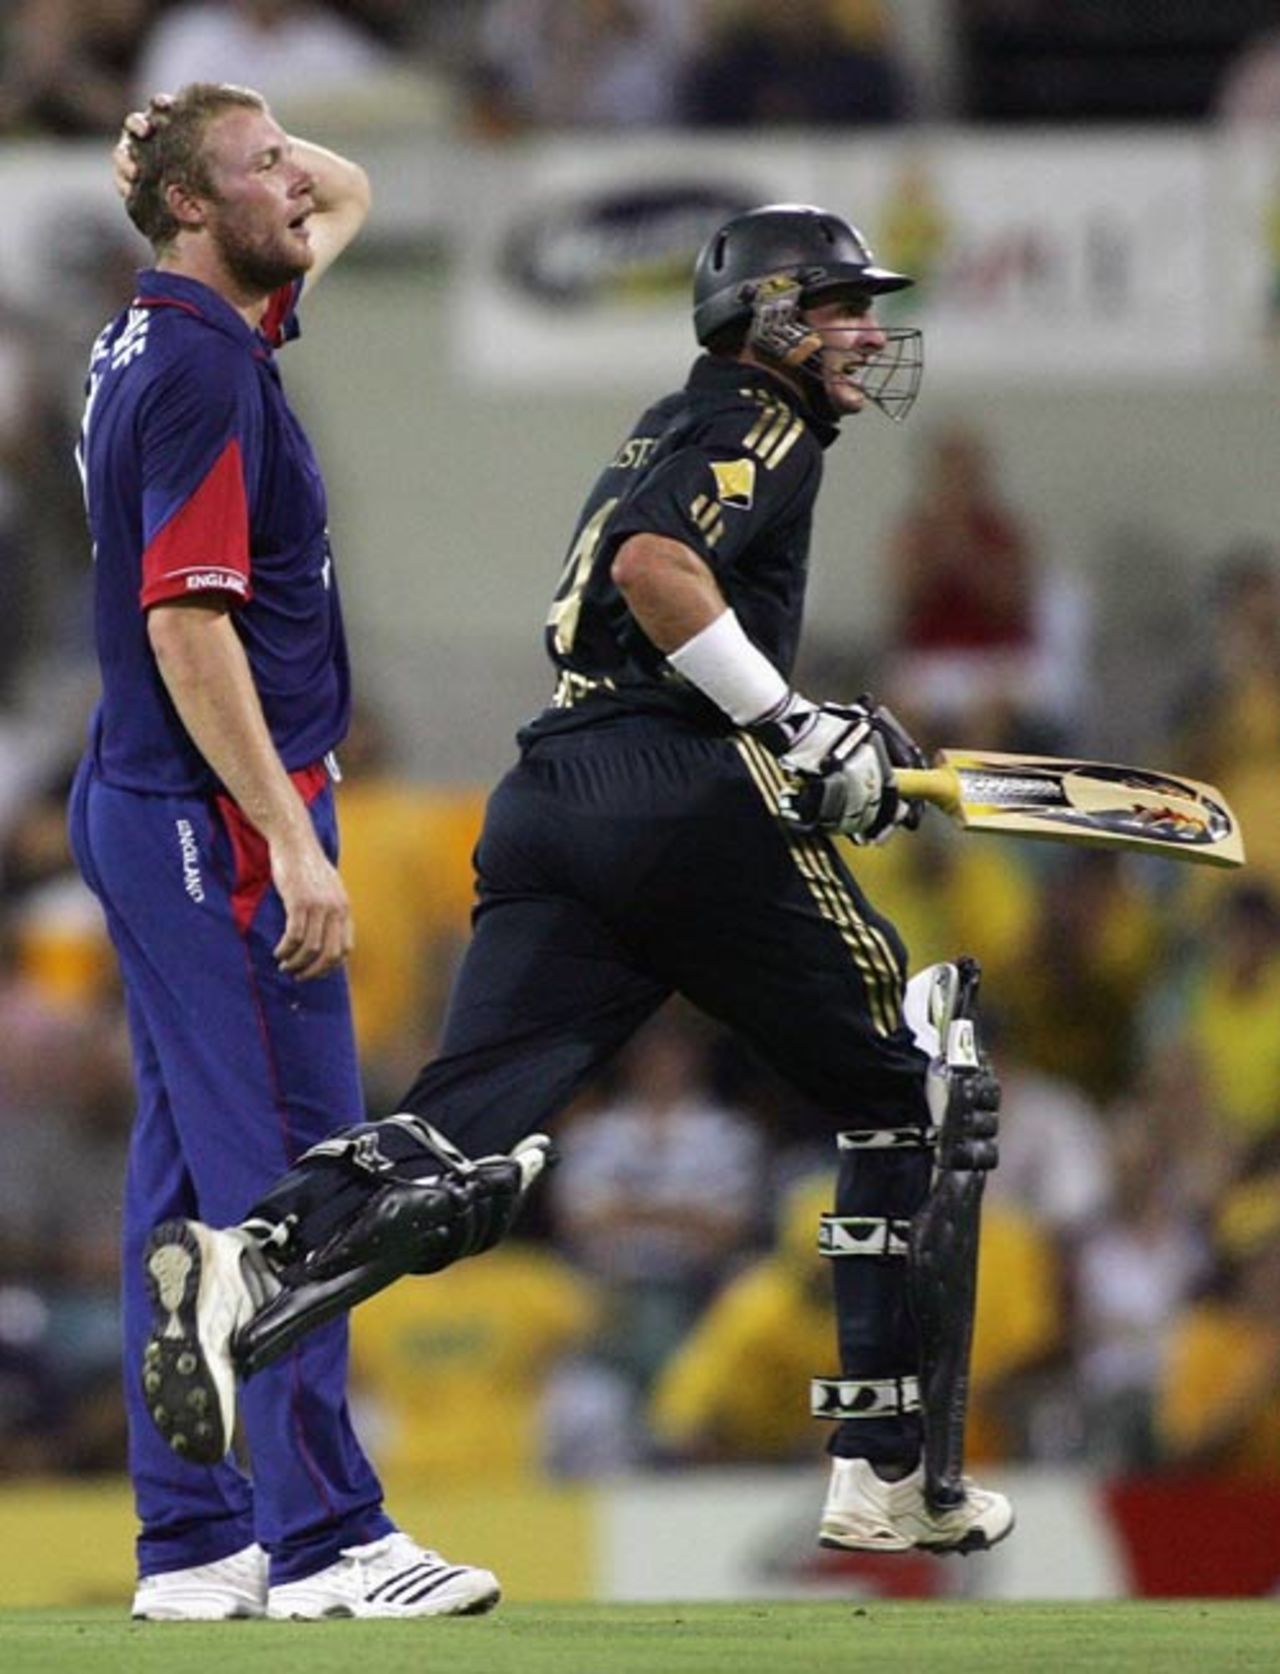 Andrew Flintoff looks on as Michael Hussey steals another run, Australia v England, CB Series, 4th match, Brisbane, January 19, 2007